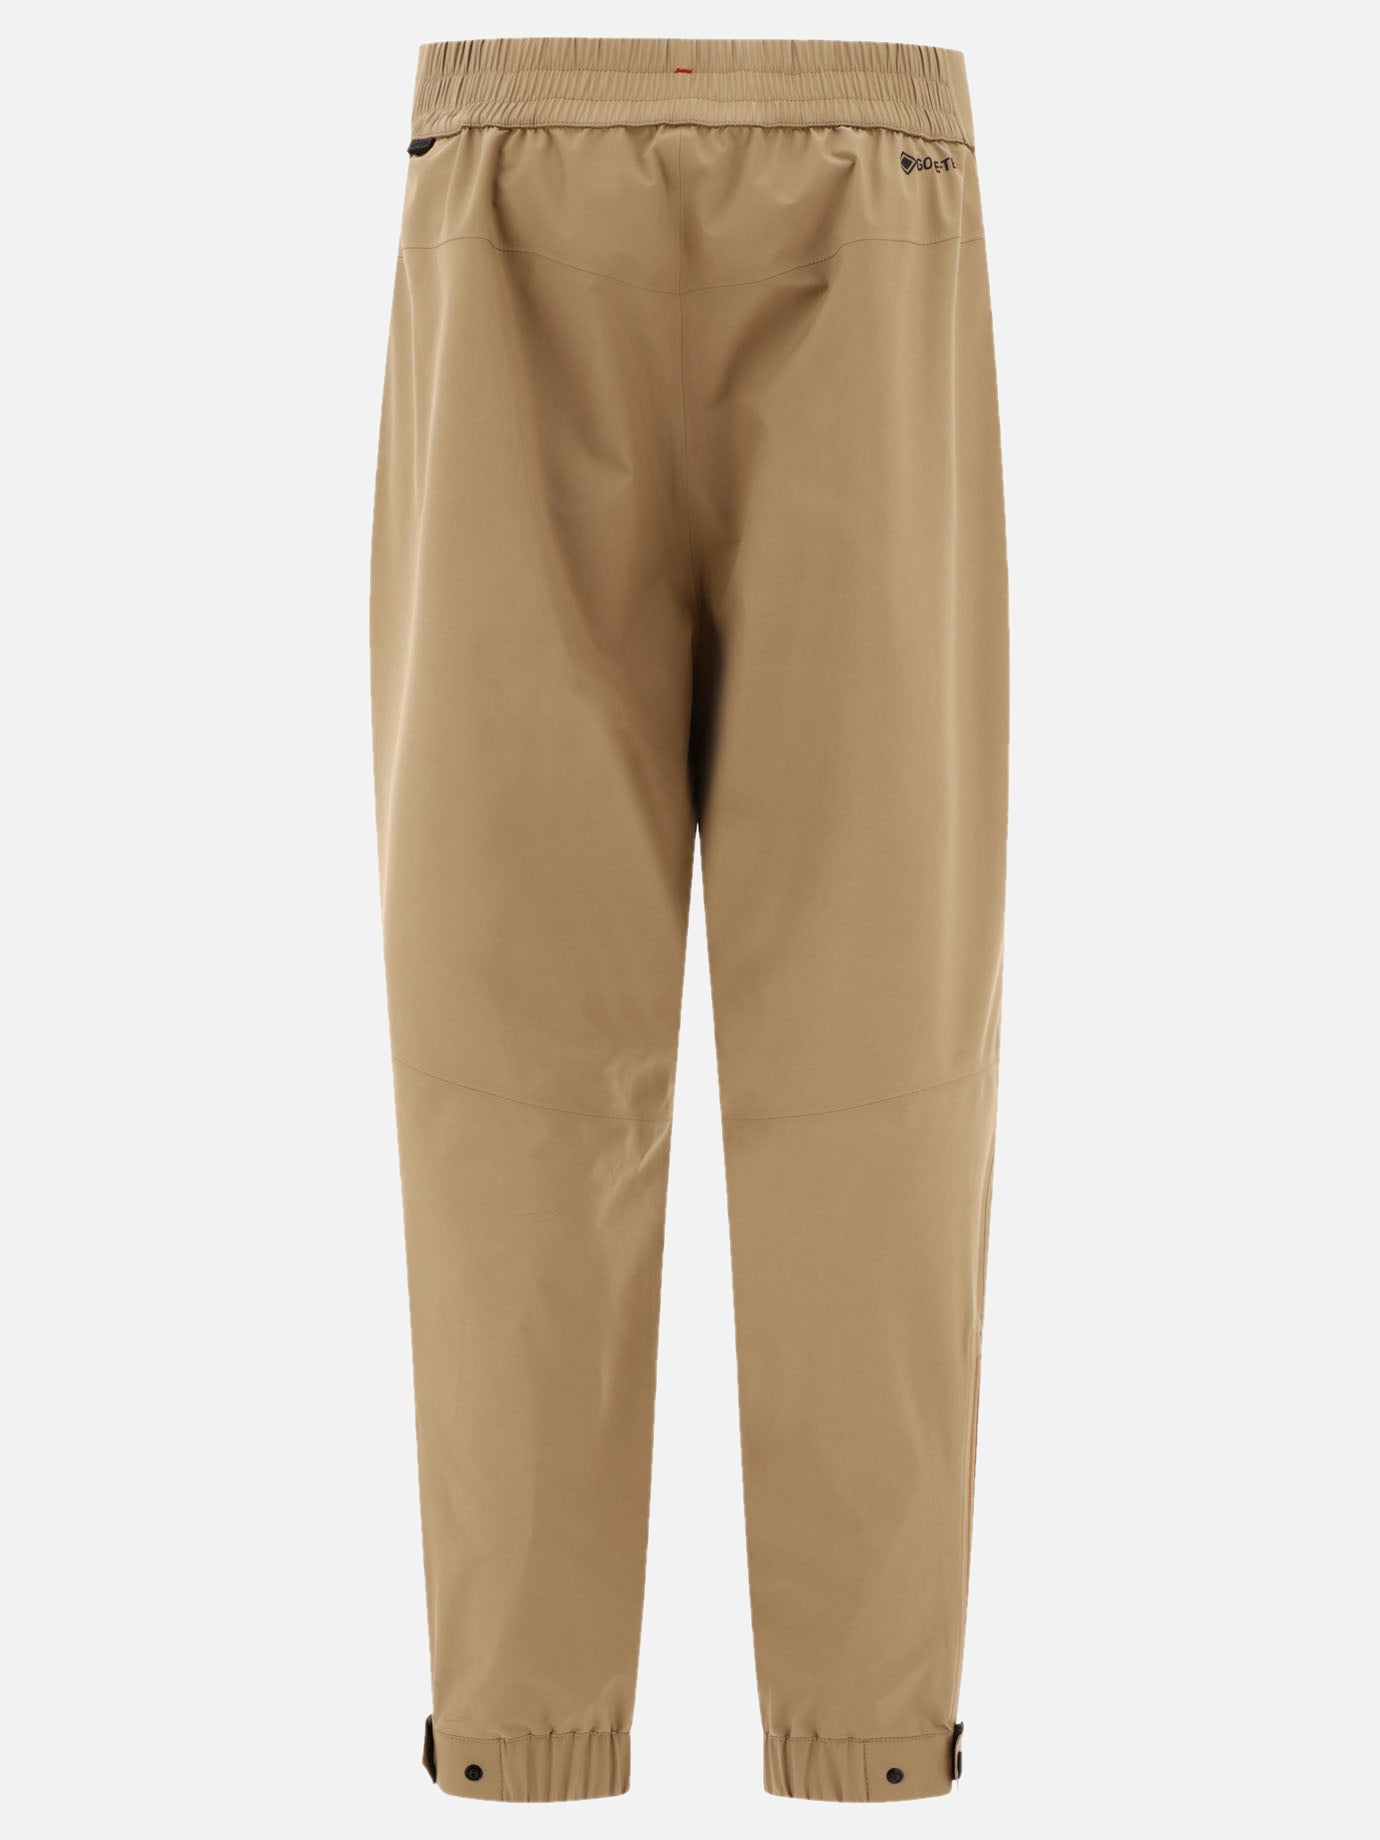 Gore-Tex trousers